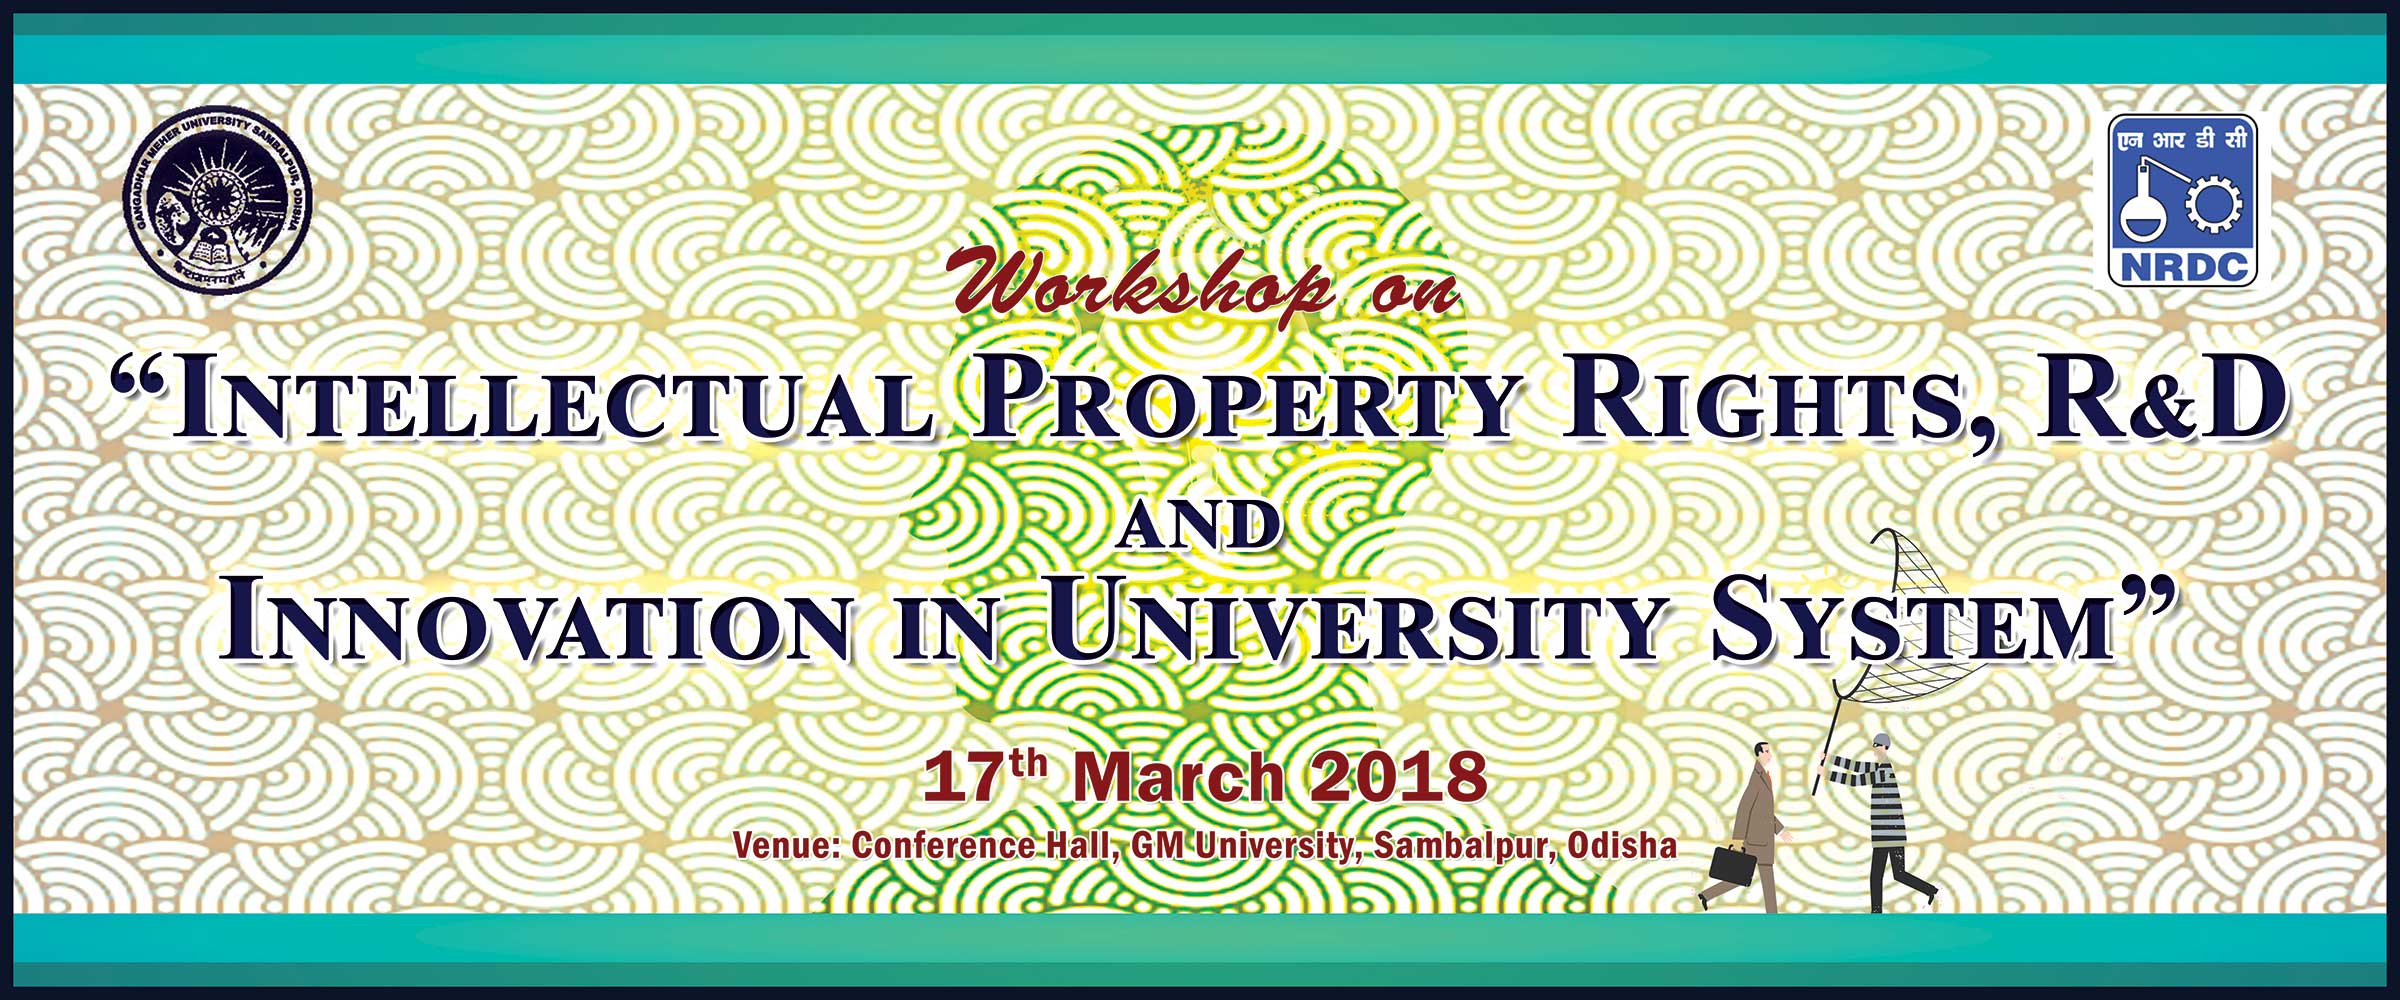 Workshop on Intellectual Property Rights, R&D and Innovation in University System